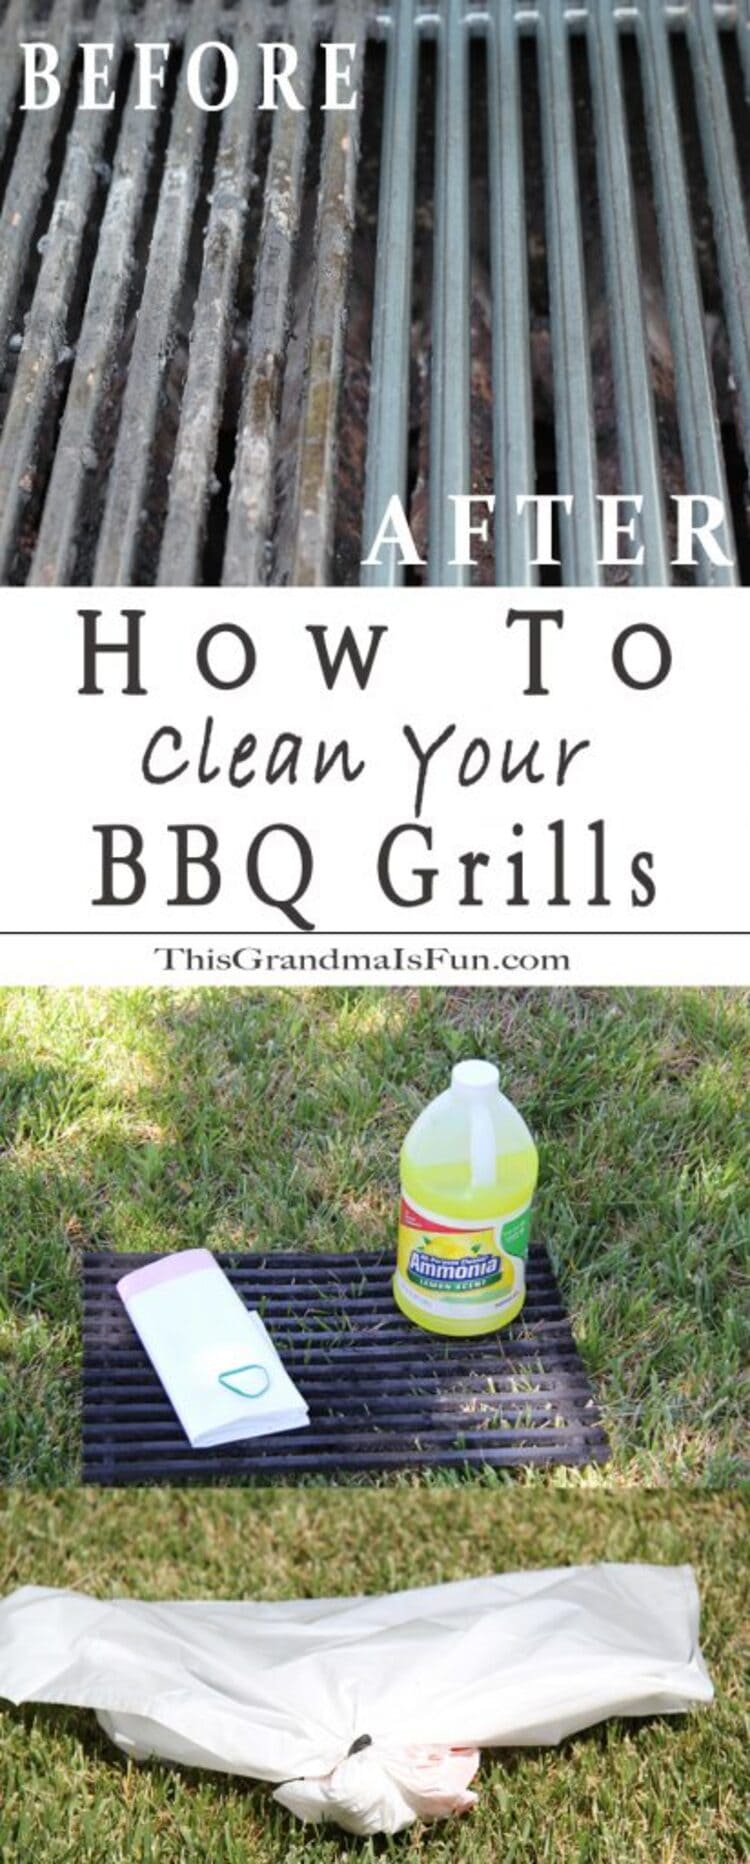 How To Clean Grill Outside Cleaning BBQ Grills the Magic Way - TGIF - This Grandma is Fun